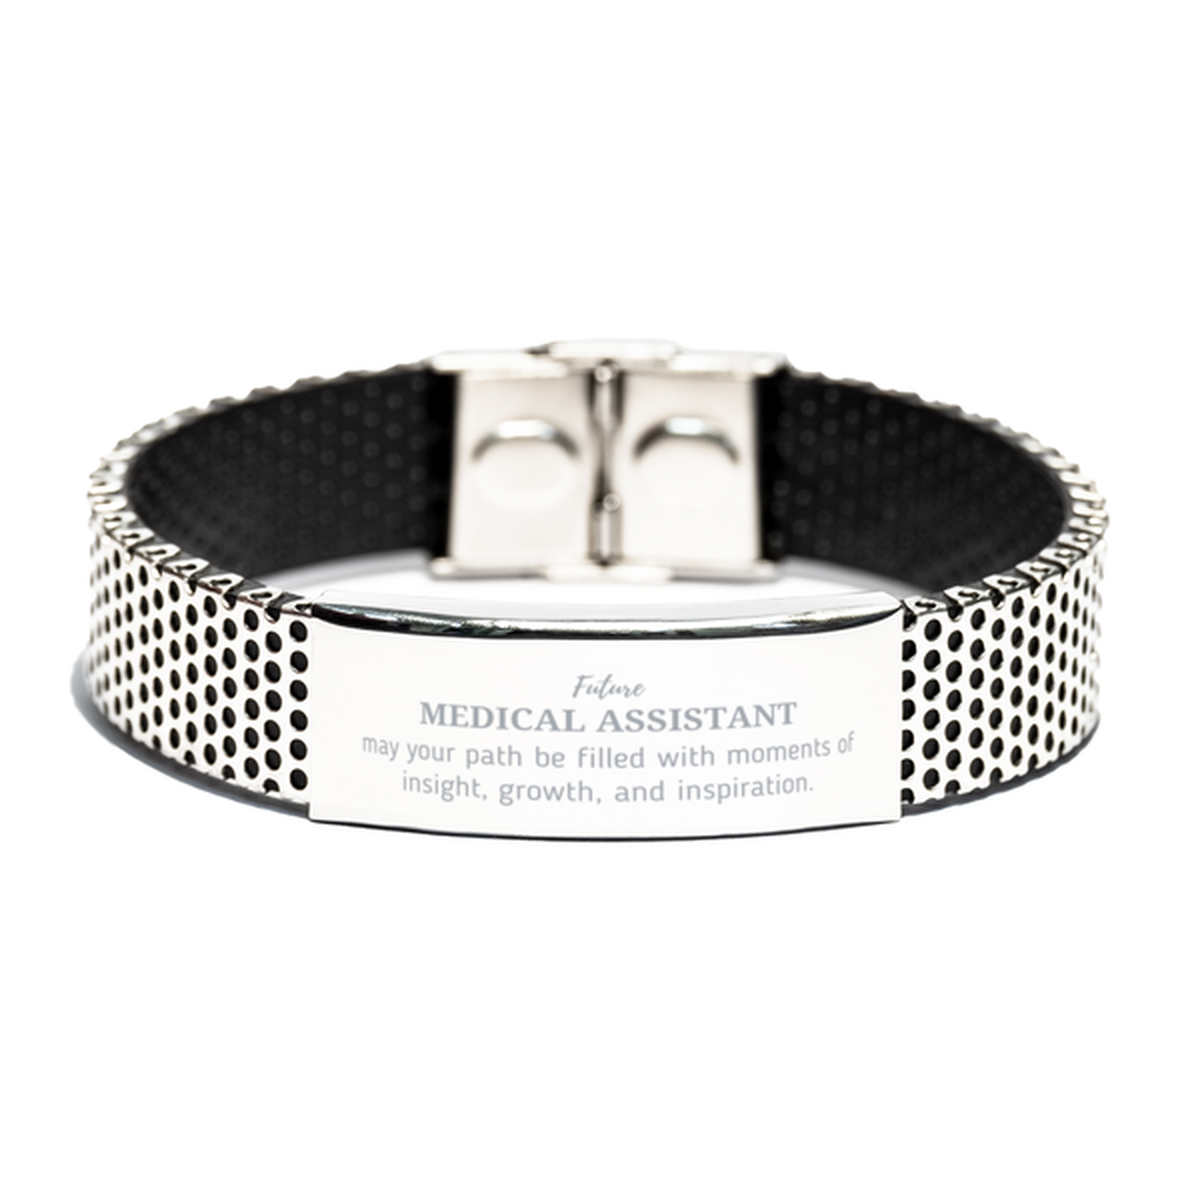 Future Medical Assistant Gifts, May your path be filled with moments of insight, Graduation Gifts for New Medical Assistant, Christmas Unique Stainless Steel Bracelet For Men, Women, Friends